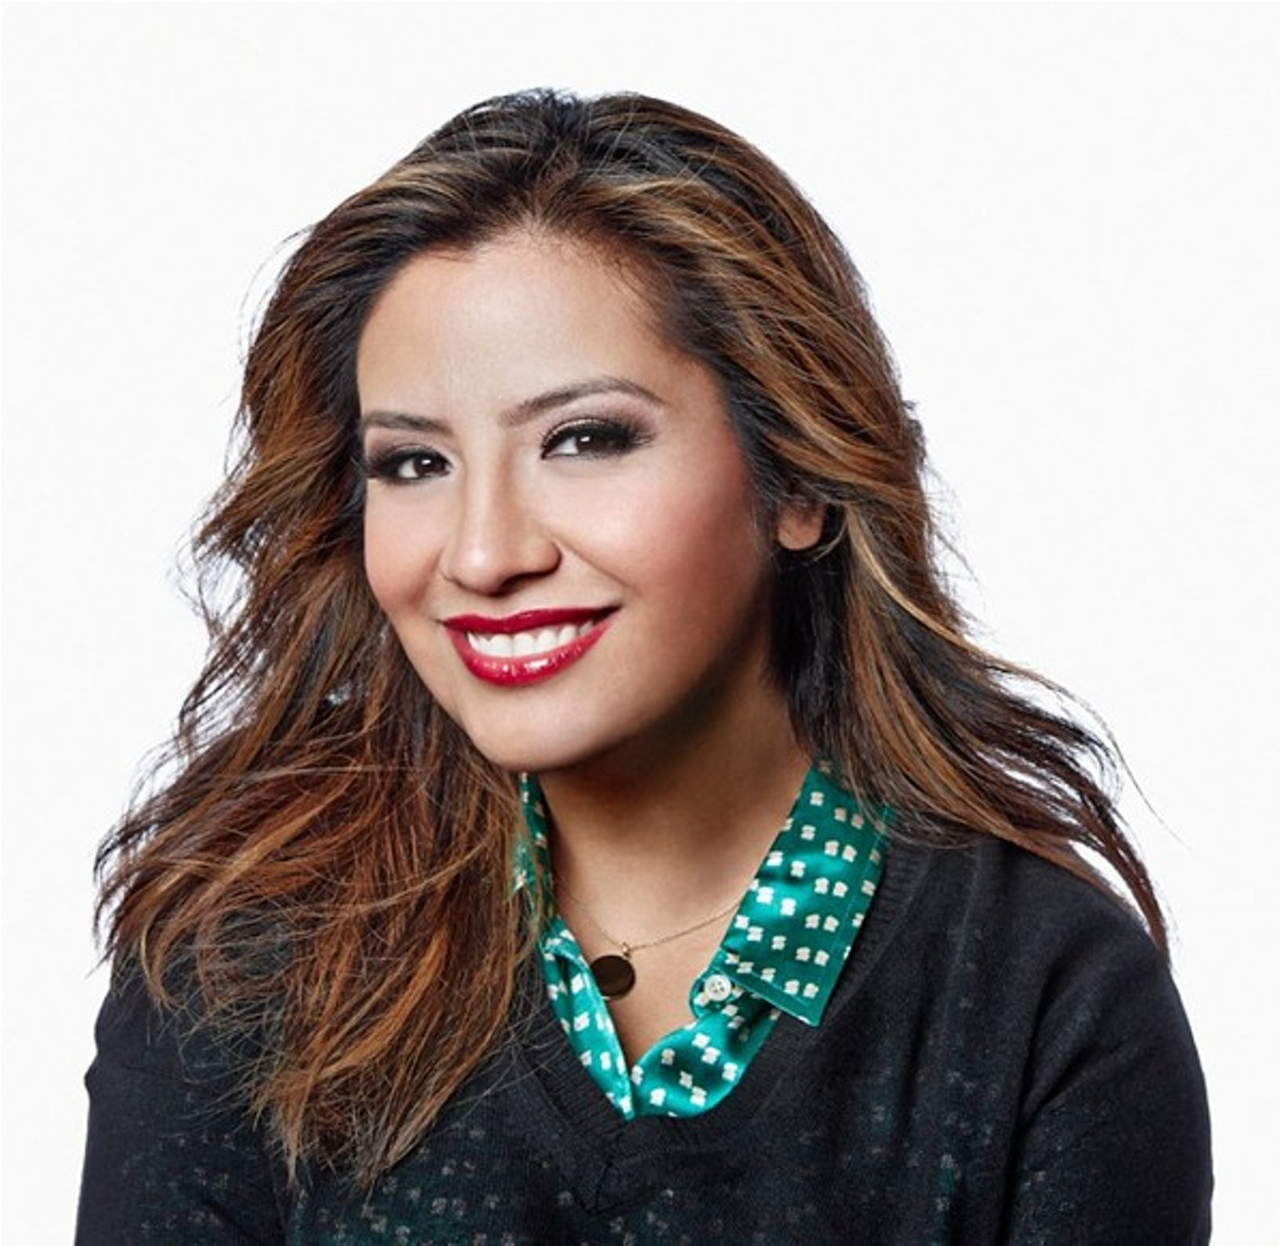 Cristela Alonzo
$29.75, 7pm & 10pm, Charline McCombs Empire Theatre, 226 N. St. Mary&#146;s St., (210) 226-5700, majesticempire.com
It has been over a year since Texas-born comedian Cristela Alonzo&#146;s self-titled ABC sitcom Cristela was cancelled after only one season, and since then Alonzo has released her first stand-up CD through Comedy Central, guest hosted on The View and voiced an avian grandma in The Angry Birds. See her live this weekend.